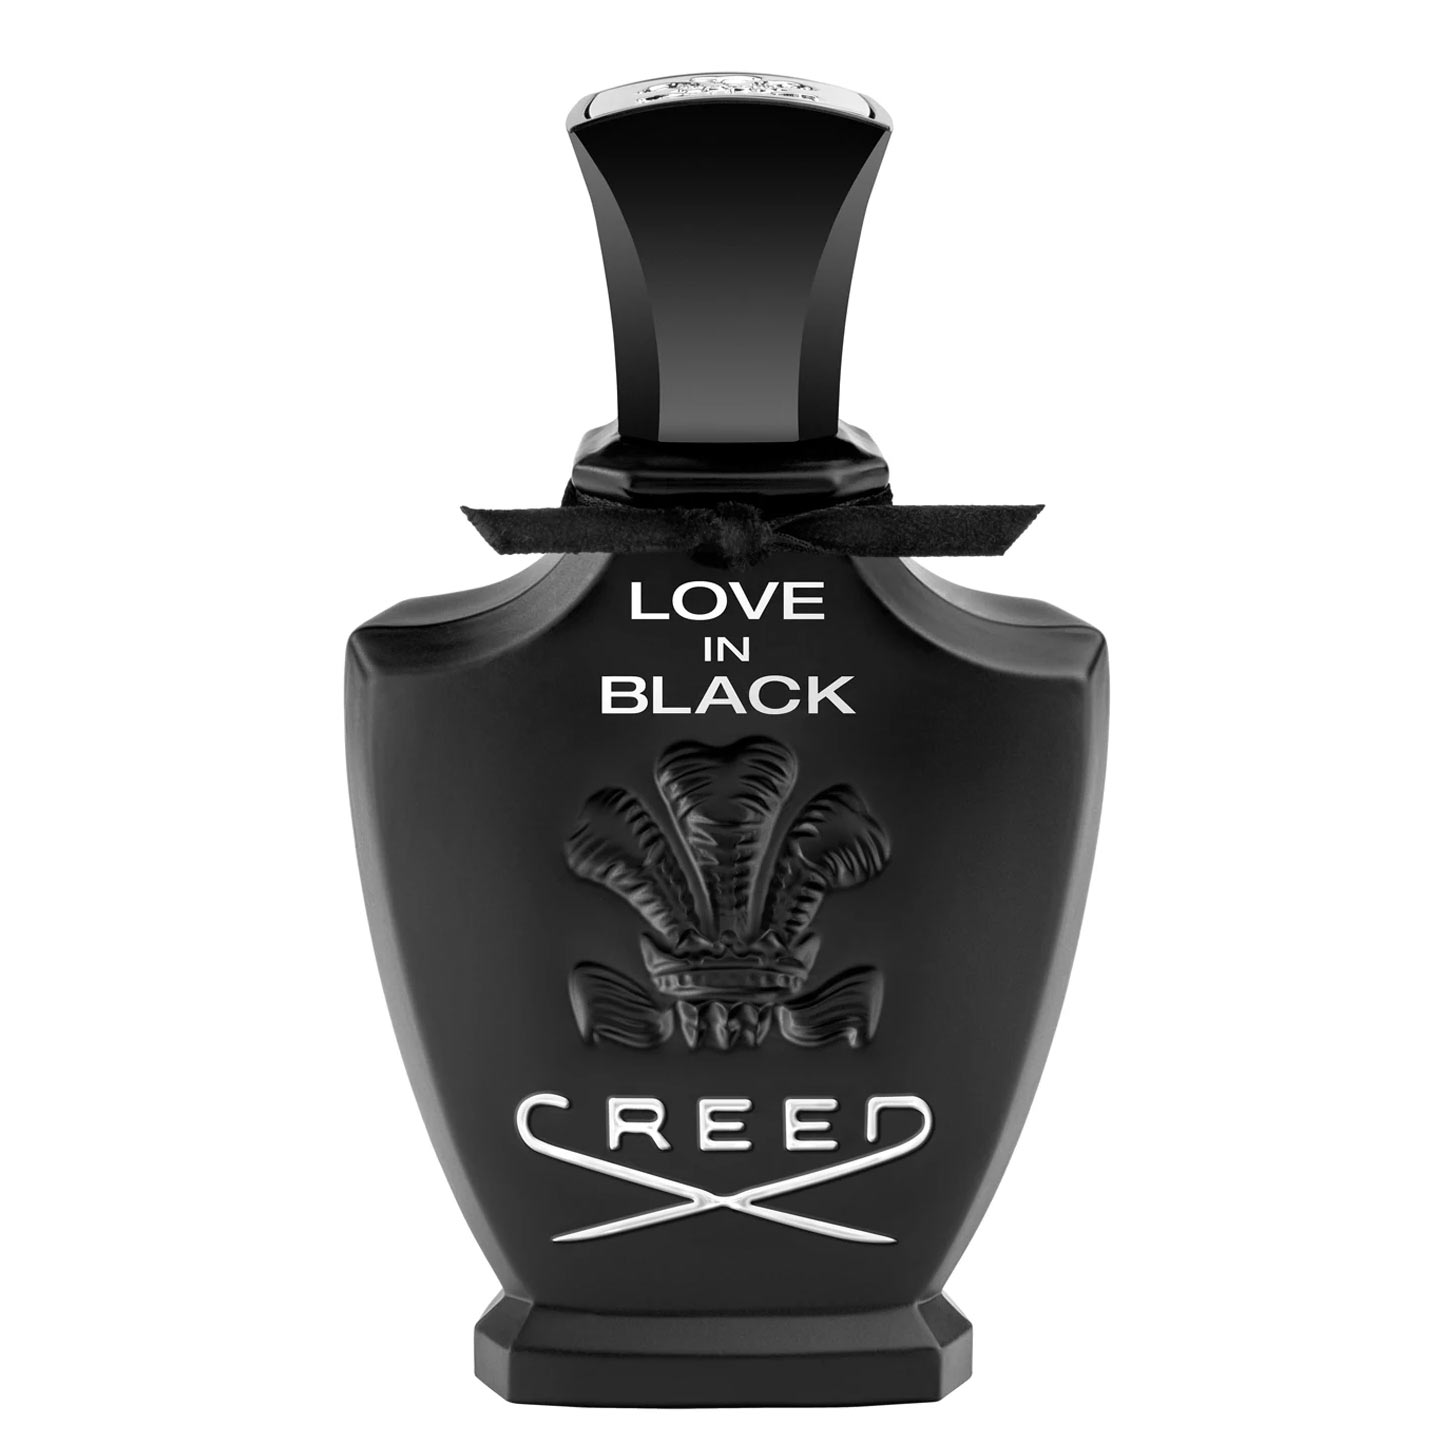 Creed Love In Black Creed Image